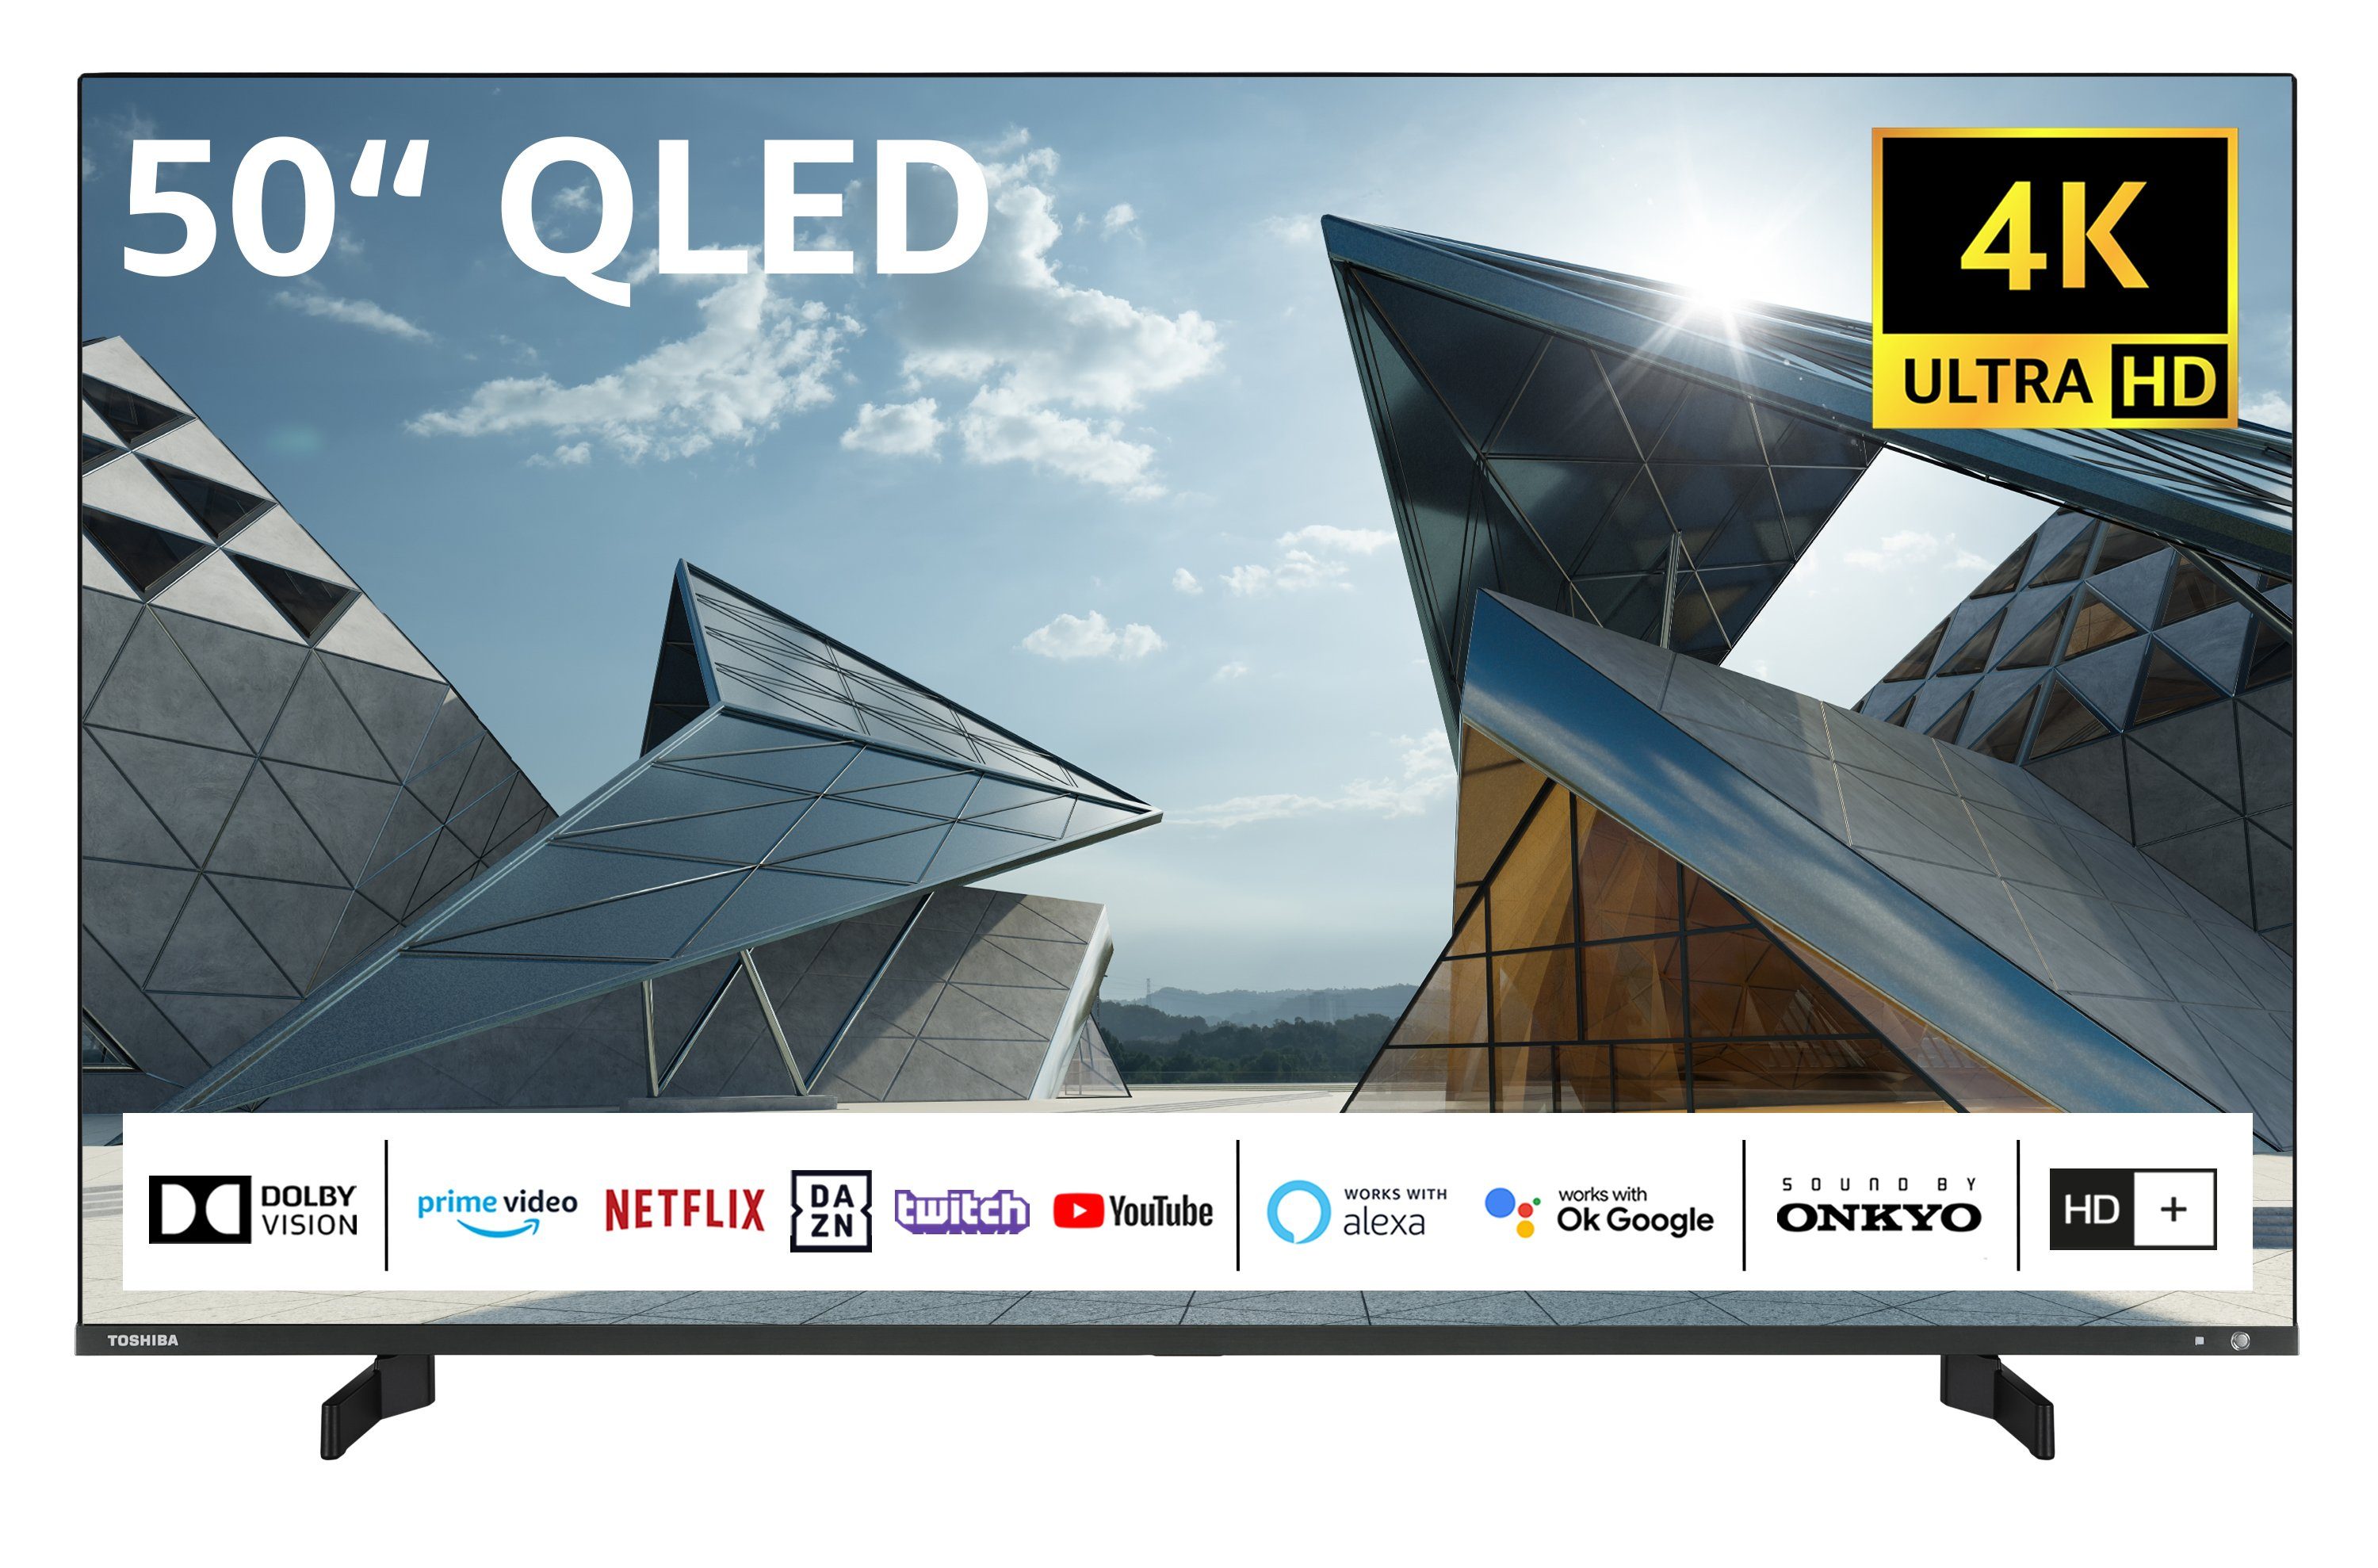 HDR Monate by 4K HD, HD) 6 TV, Vision, Dolby Inkl. Ultra Onkyo 50QL5D63DAY Sound cm/50 (126 Zoll, QLED-Fernseher - Triple-Tuner, Toshiba Smart